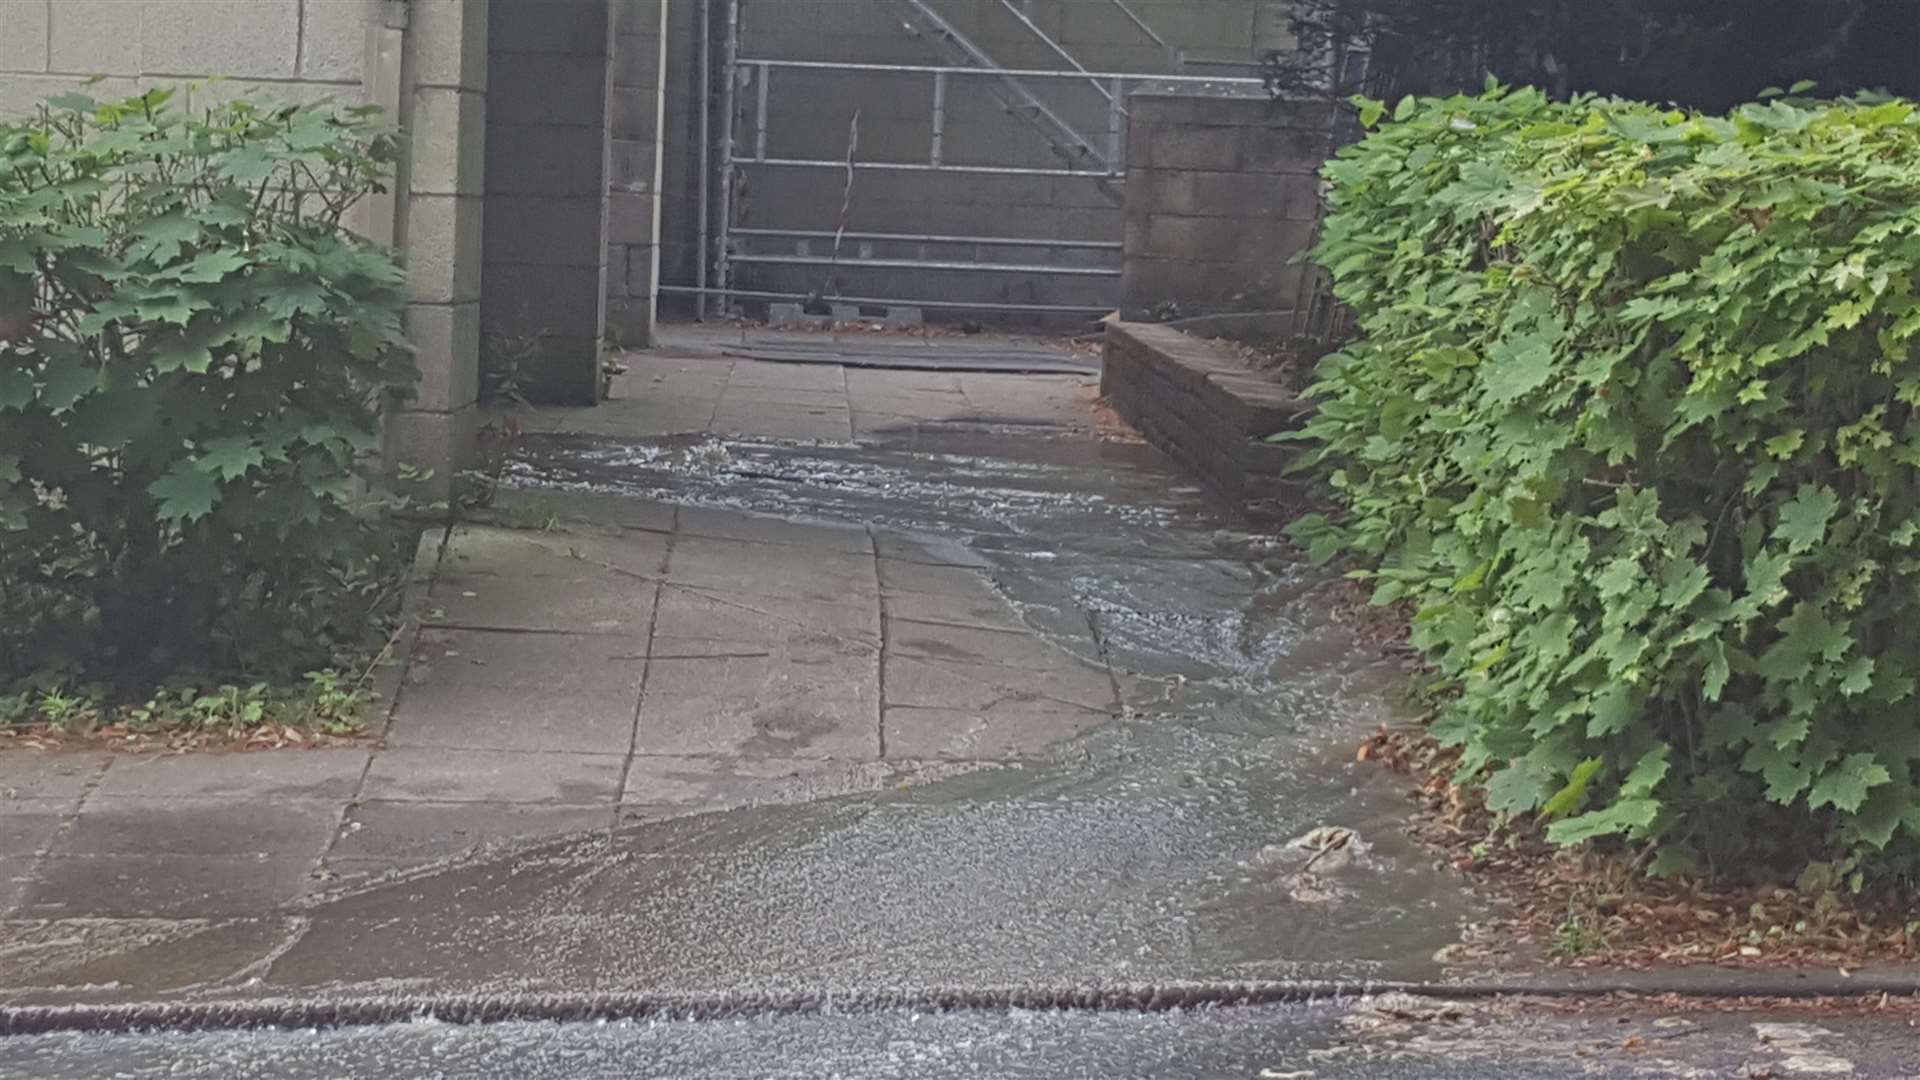 The leak is flowing towards the park (14115771)